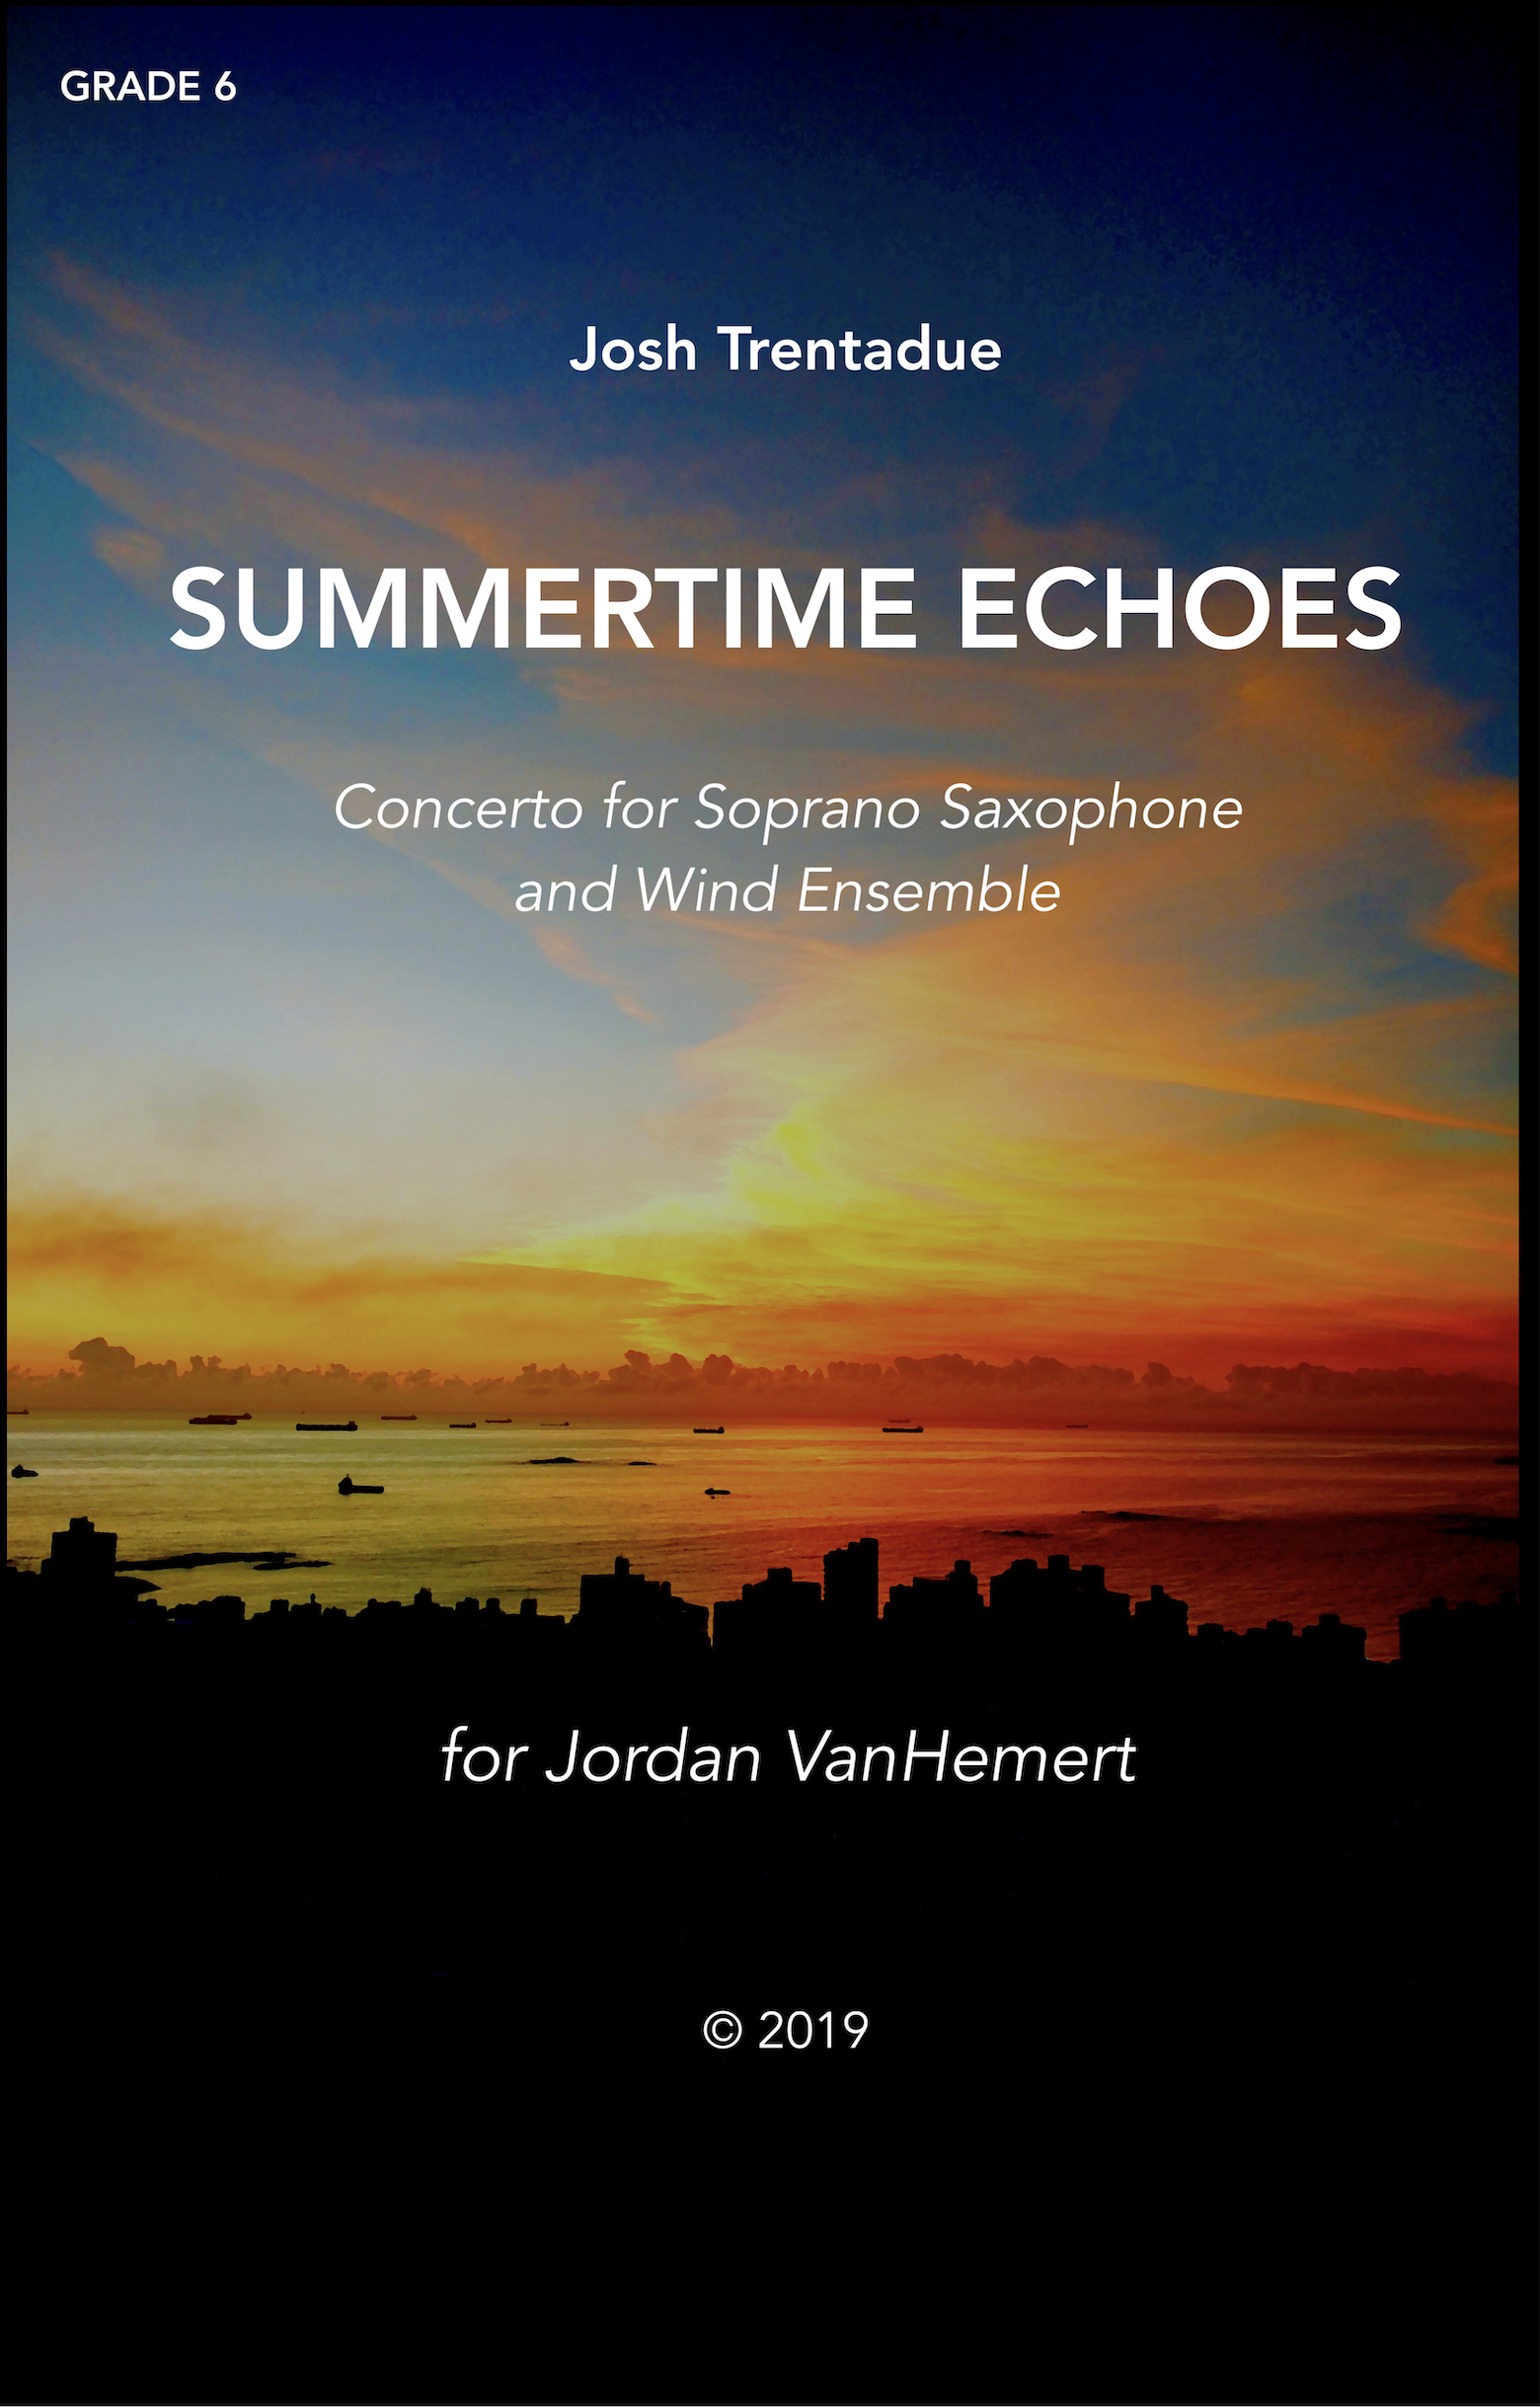 Summertime Echoes (Score Only) by Josh Trentadue 